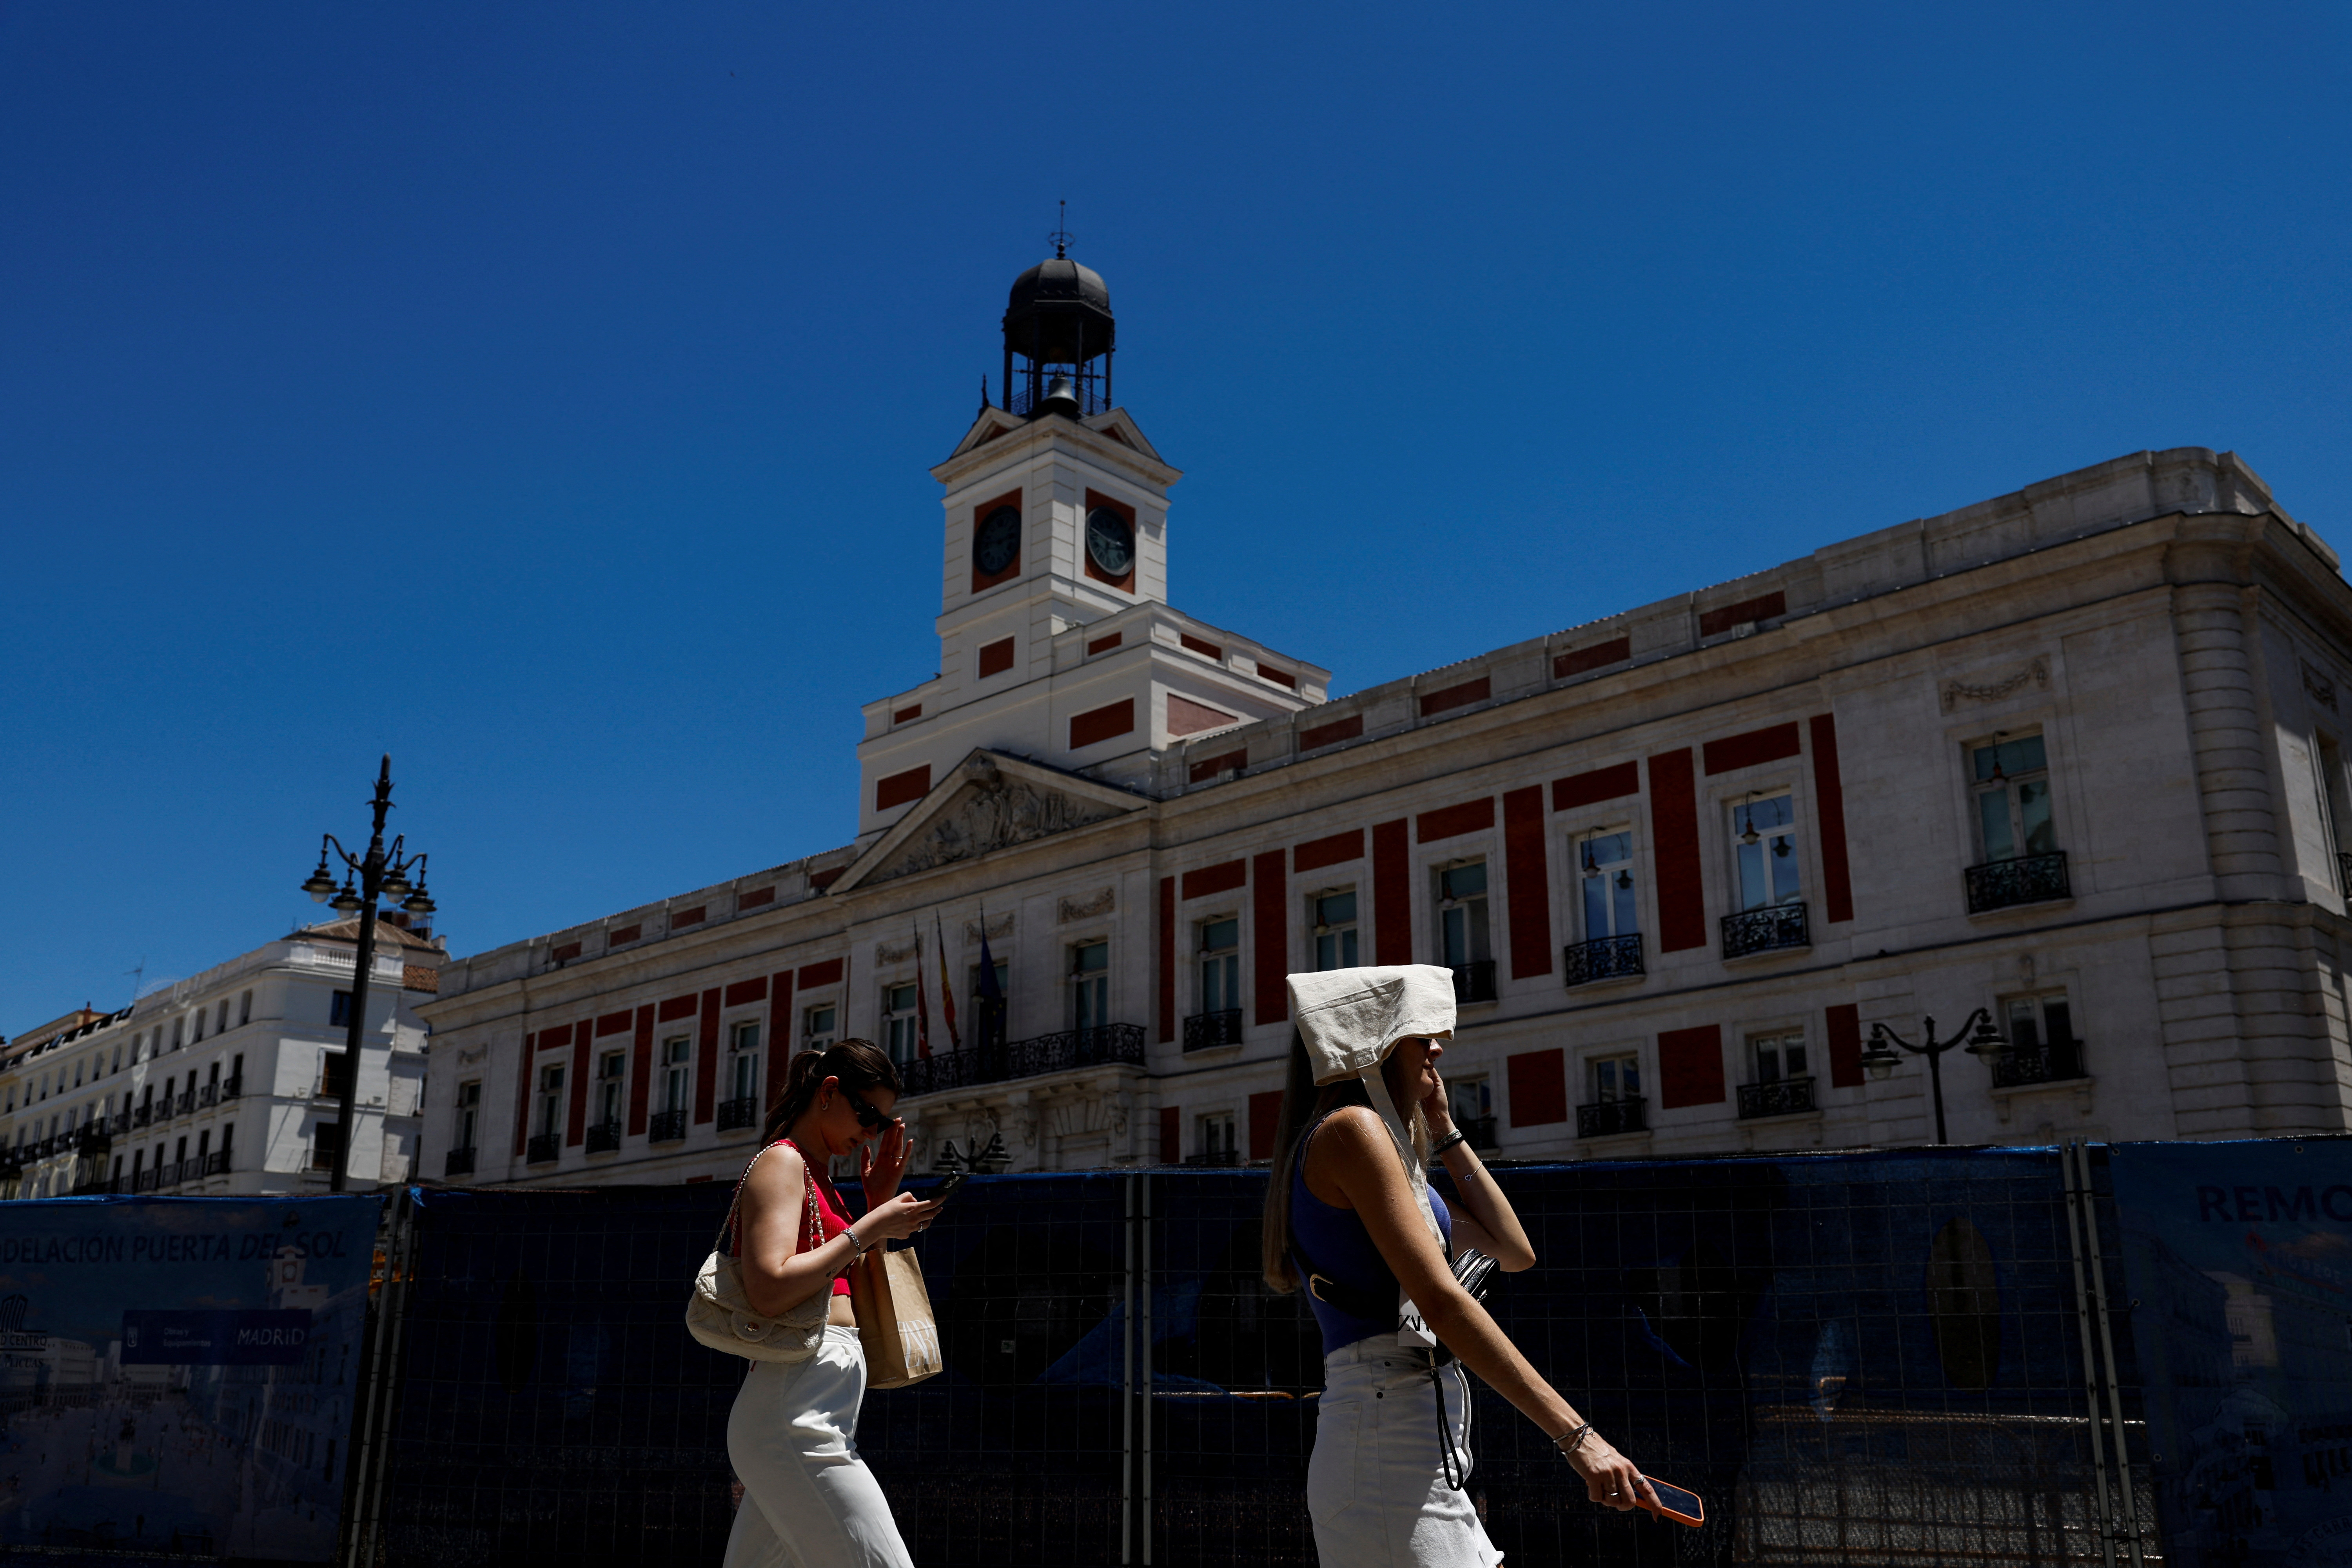 A woman covers her head with a bag during a hot day as Spain braces for a heatwave in Madrid